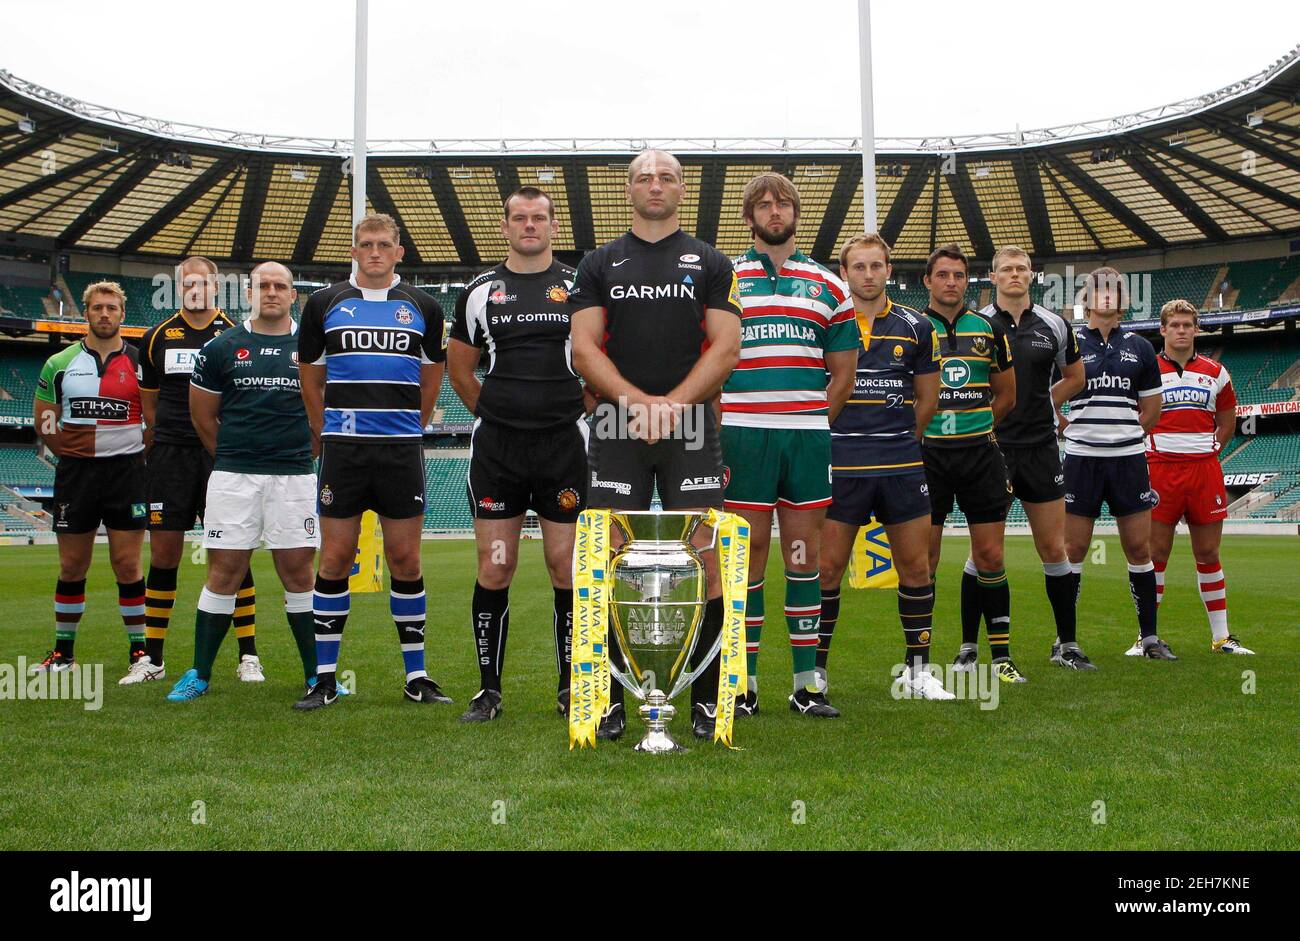 Rugby Union - Aviva Premiership Rugby Season Launch 2011/12 - Twickenham Stadium - 24/8/11  (L-R) Chris Robshaw of Harlequins, John Hart of London Wasps, Clarke Dermody of London Irish, Stuart Hooper of Bath Rugby, Tom Hayes of Exeter Chiefs, Steve Borthwick of Saracens, Geoff Parling of Leicester Tigers, Chris Pennell of Worcester Warriors, Phil Dowson of Northampton Saints, James Hudson of Newcastle Falcons, James Gaskell of Sale Sharks and Luke Narraway of Gloucester Rugby with the Aviva Premiership Rugby Trophy during the season launch 2011/12  Mandatory Credit: Action Images / Paul Hardin Stock Photo